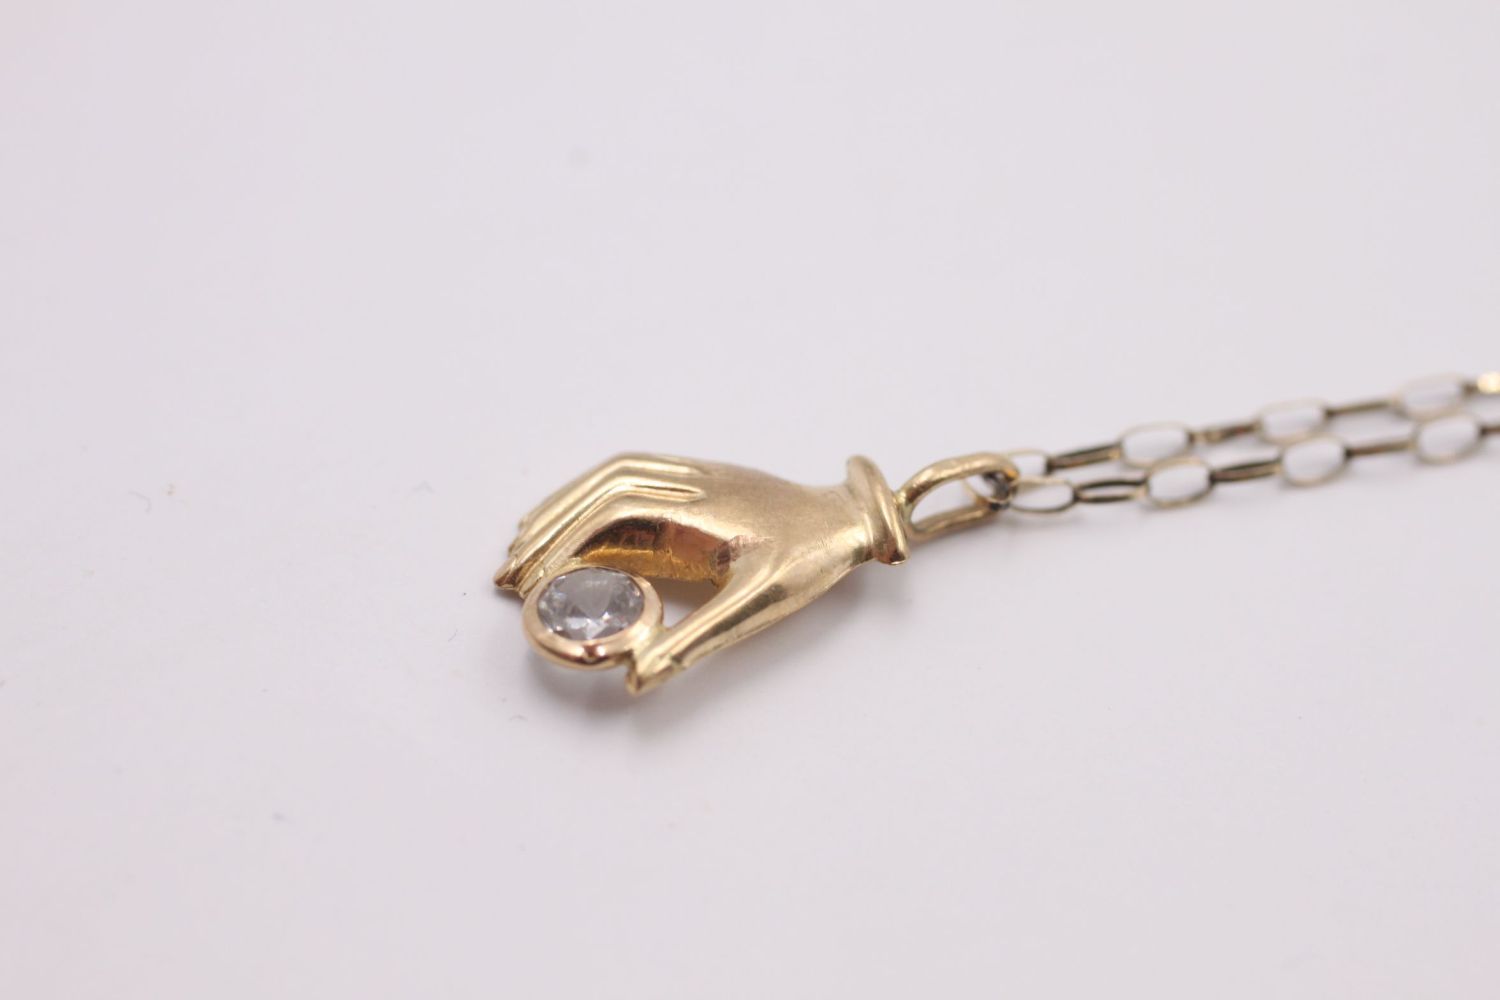 9ct gold hand holding a gemstone pendant necklace 1.2 grams gross - Image 2 of 4